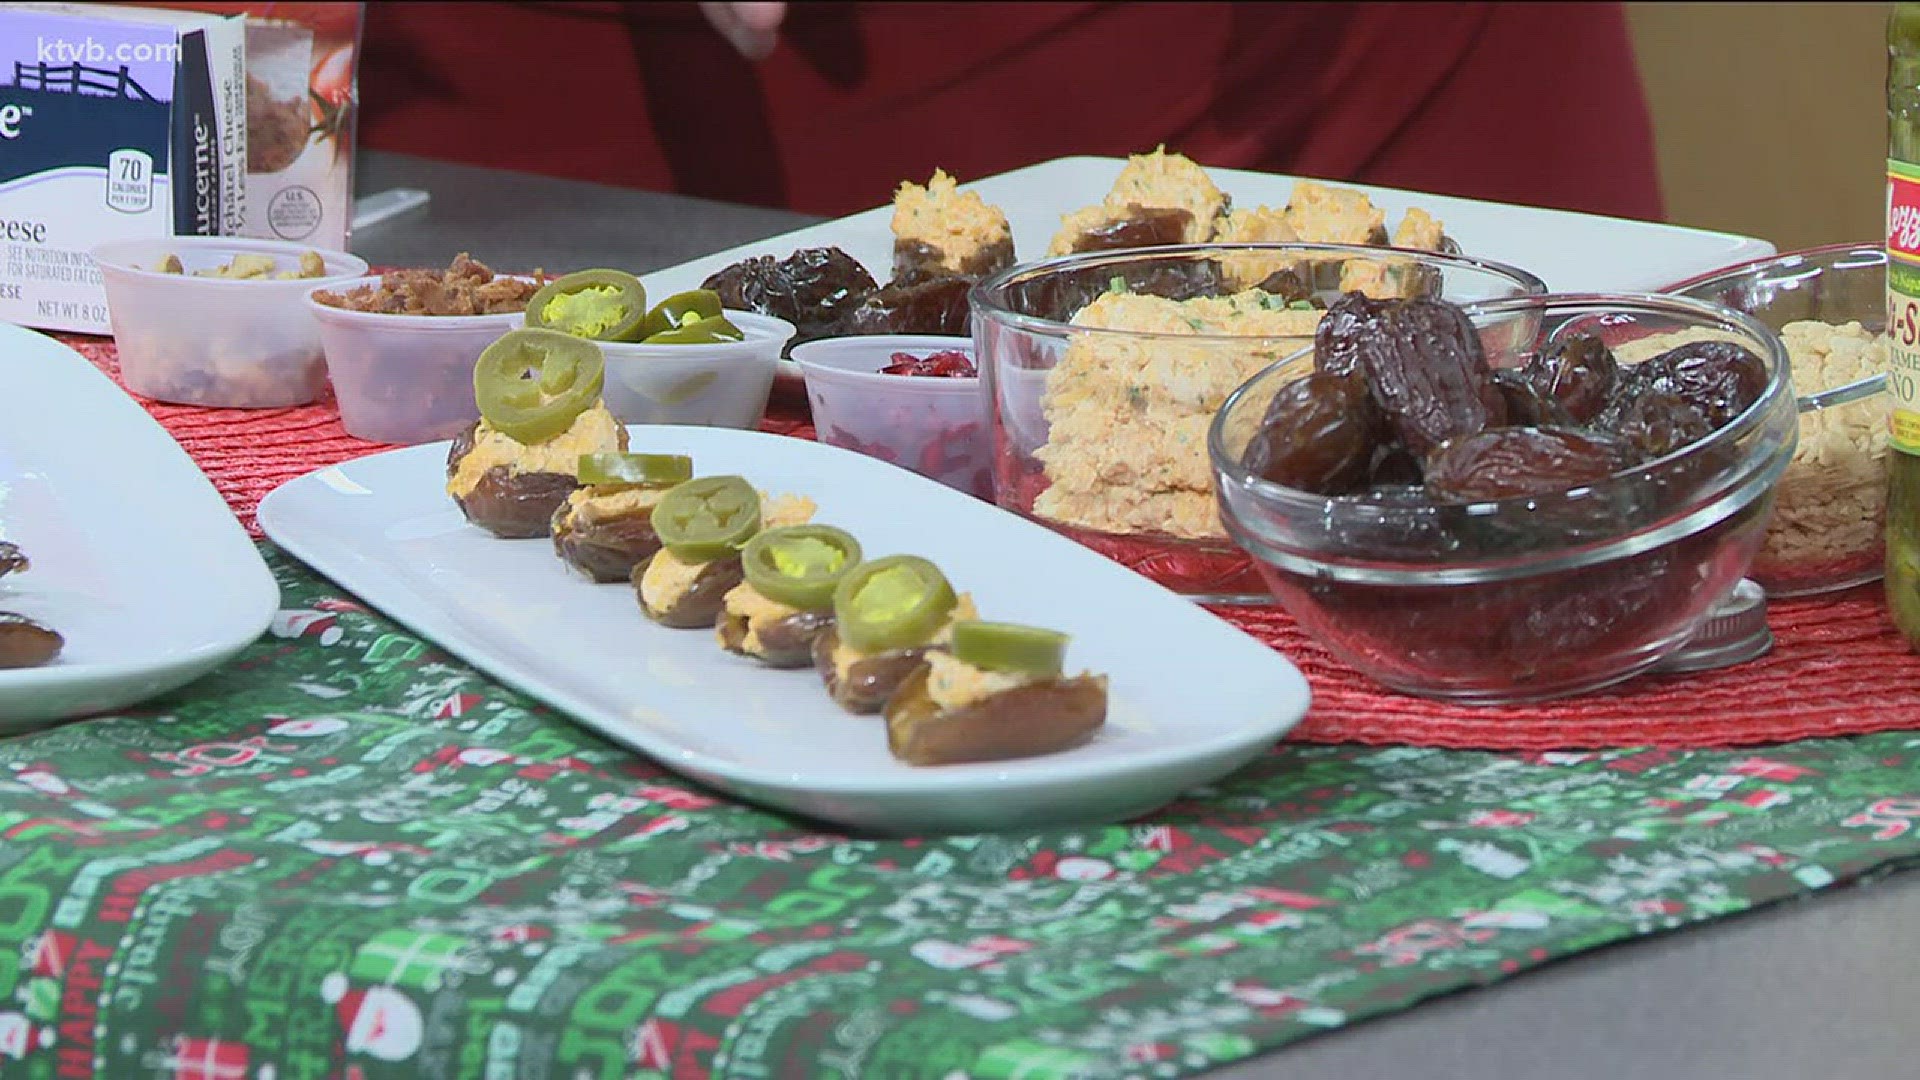 Dietitian Molly Tevis shows us how to lighten up your holiday dishes.